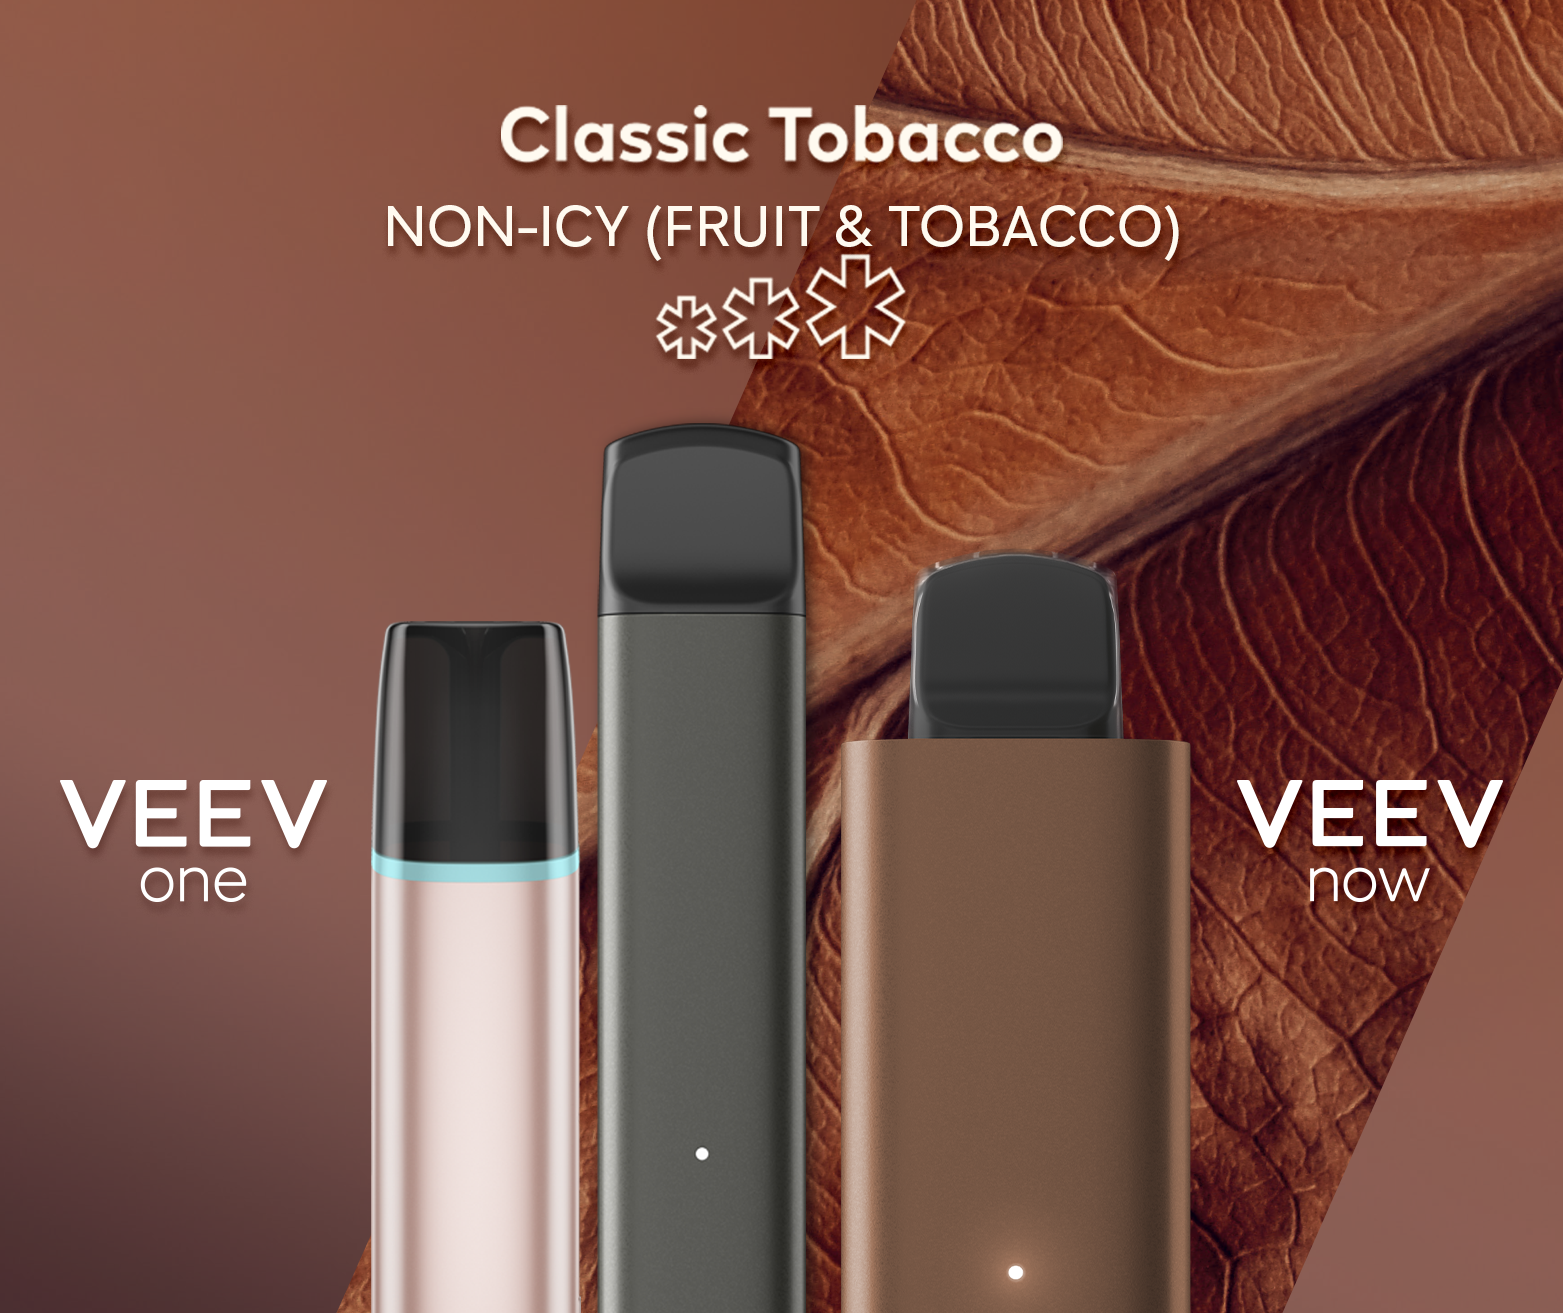 A VEEV ONE pod device and VEEV NOW disposable, both in Classic Tobacco flavour.